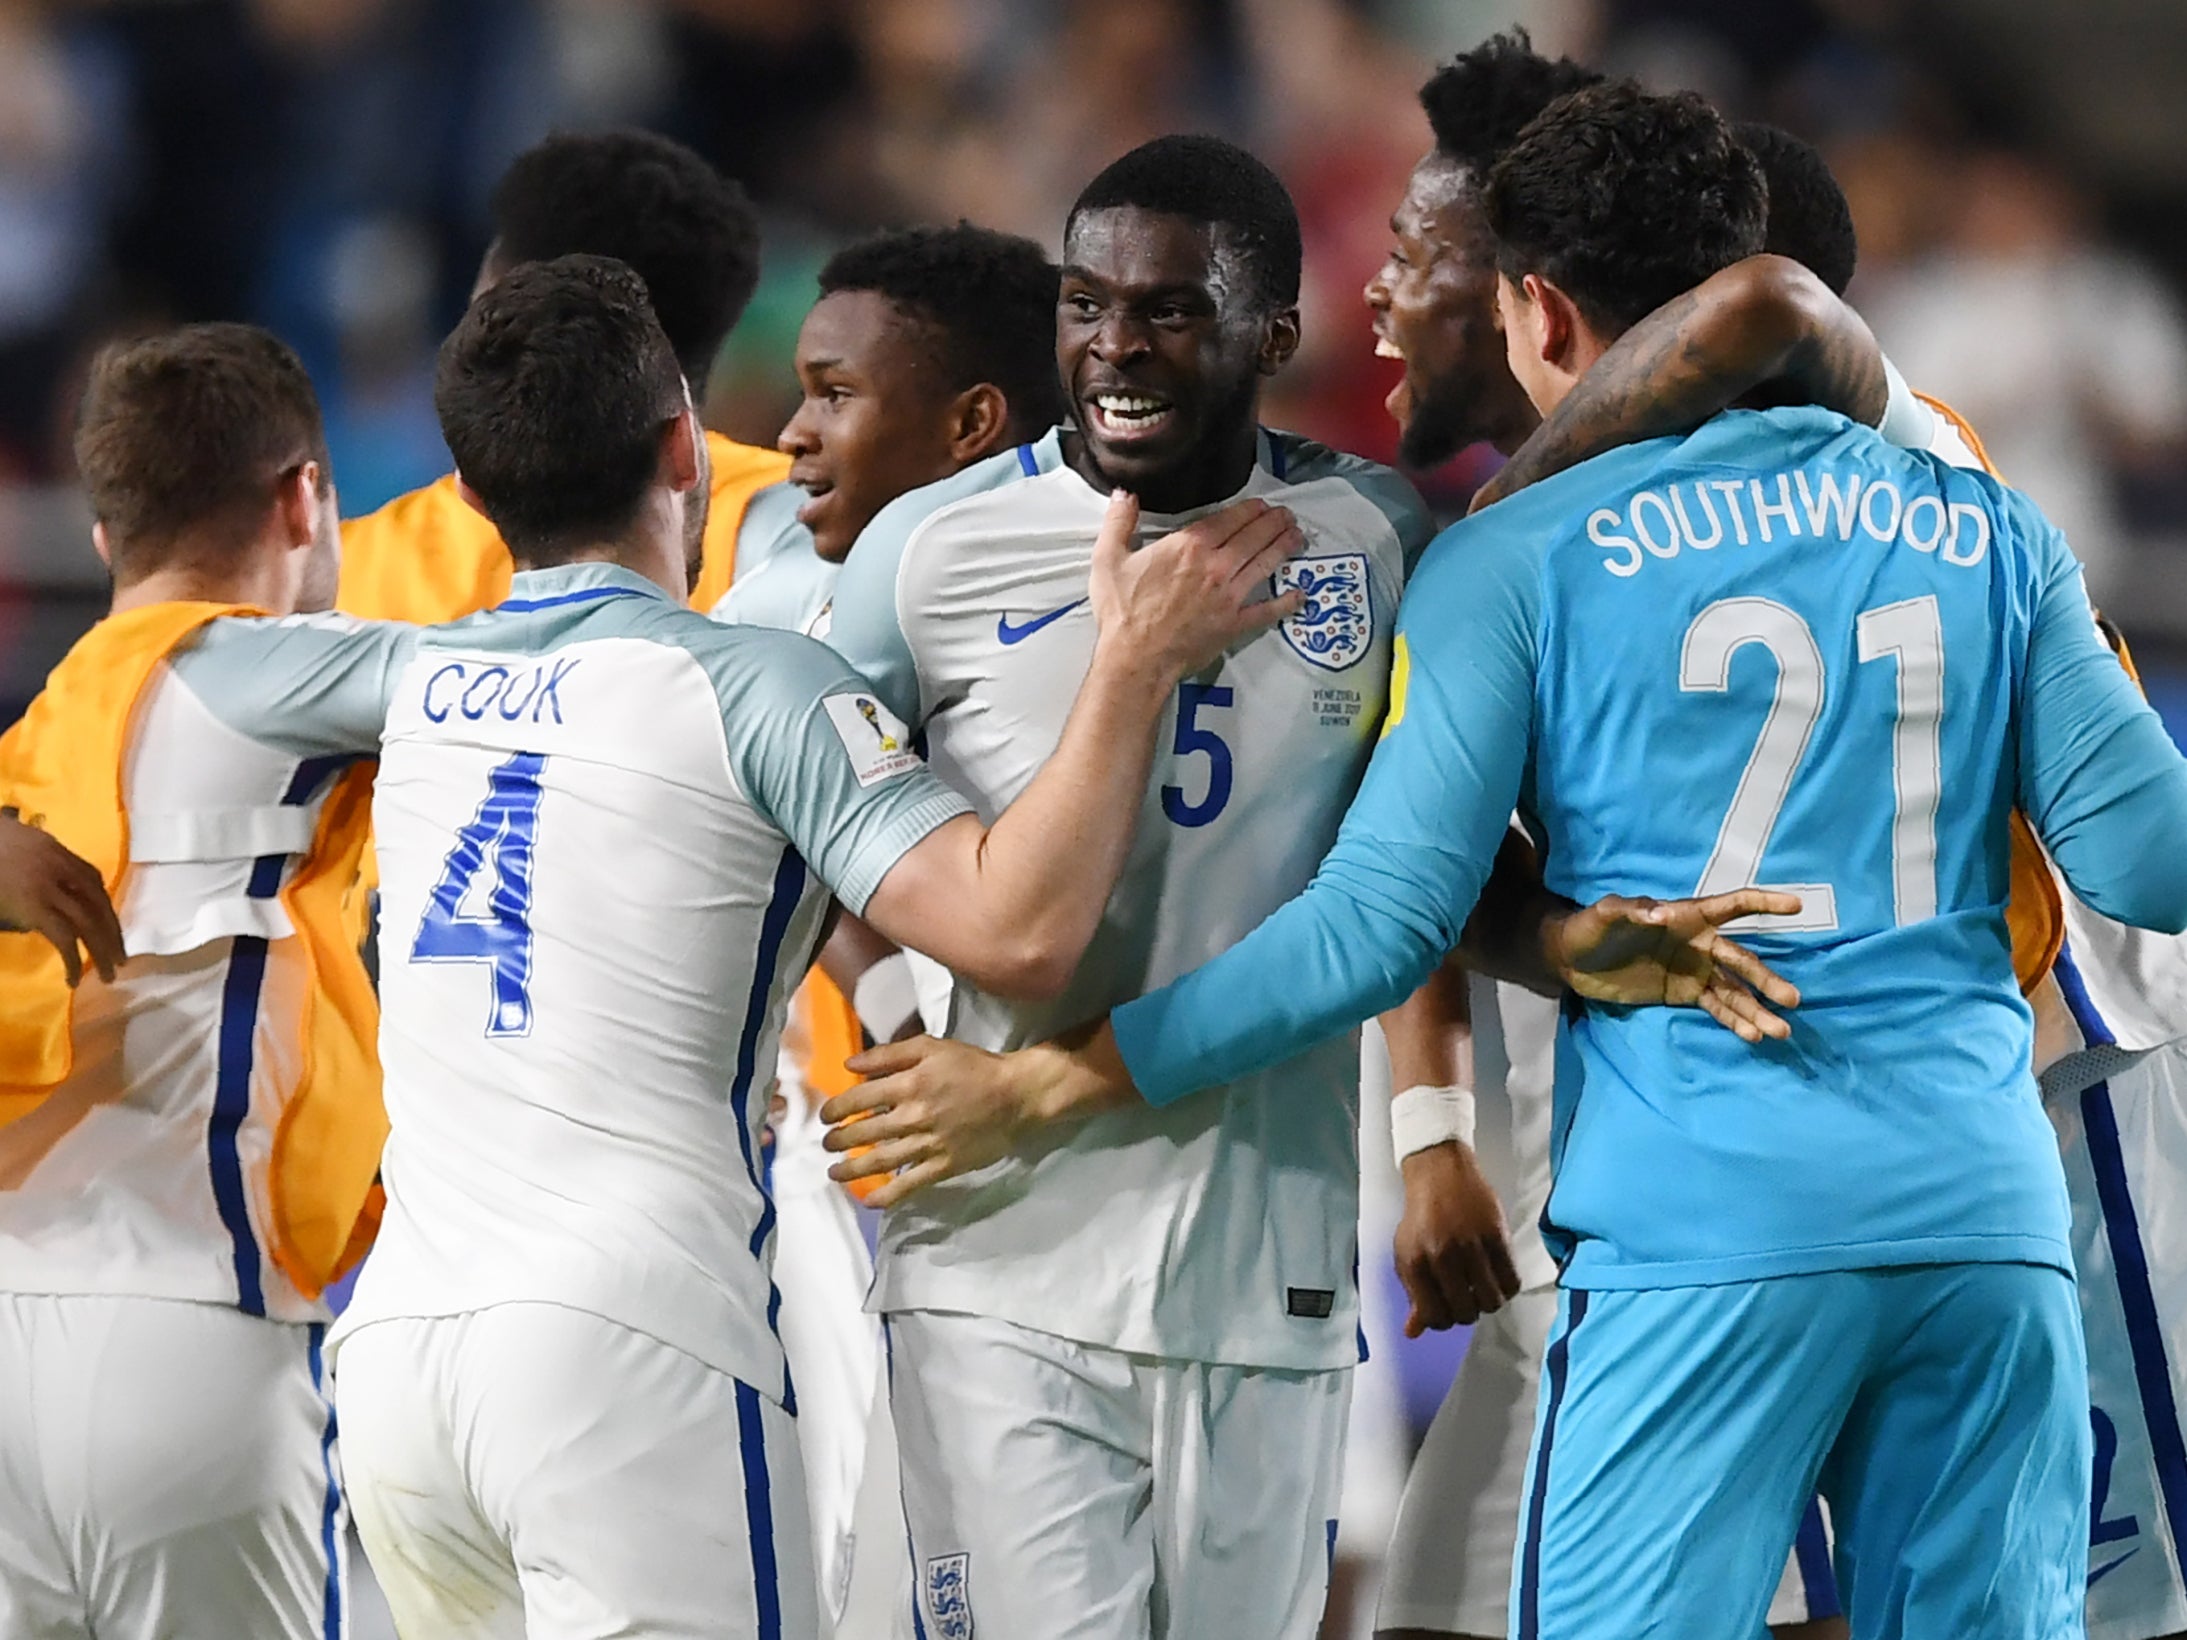 England held on to grind out a 1-0 win